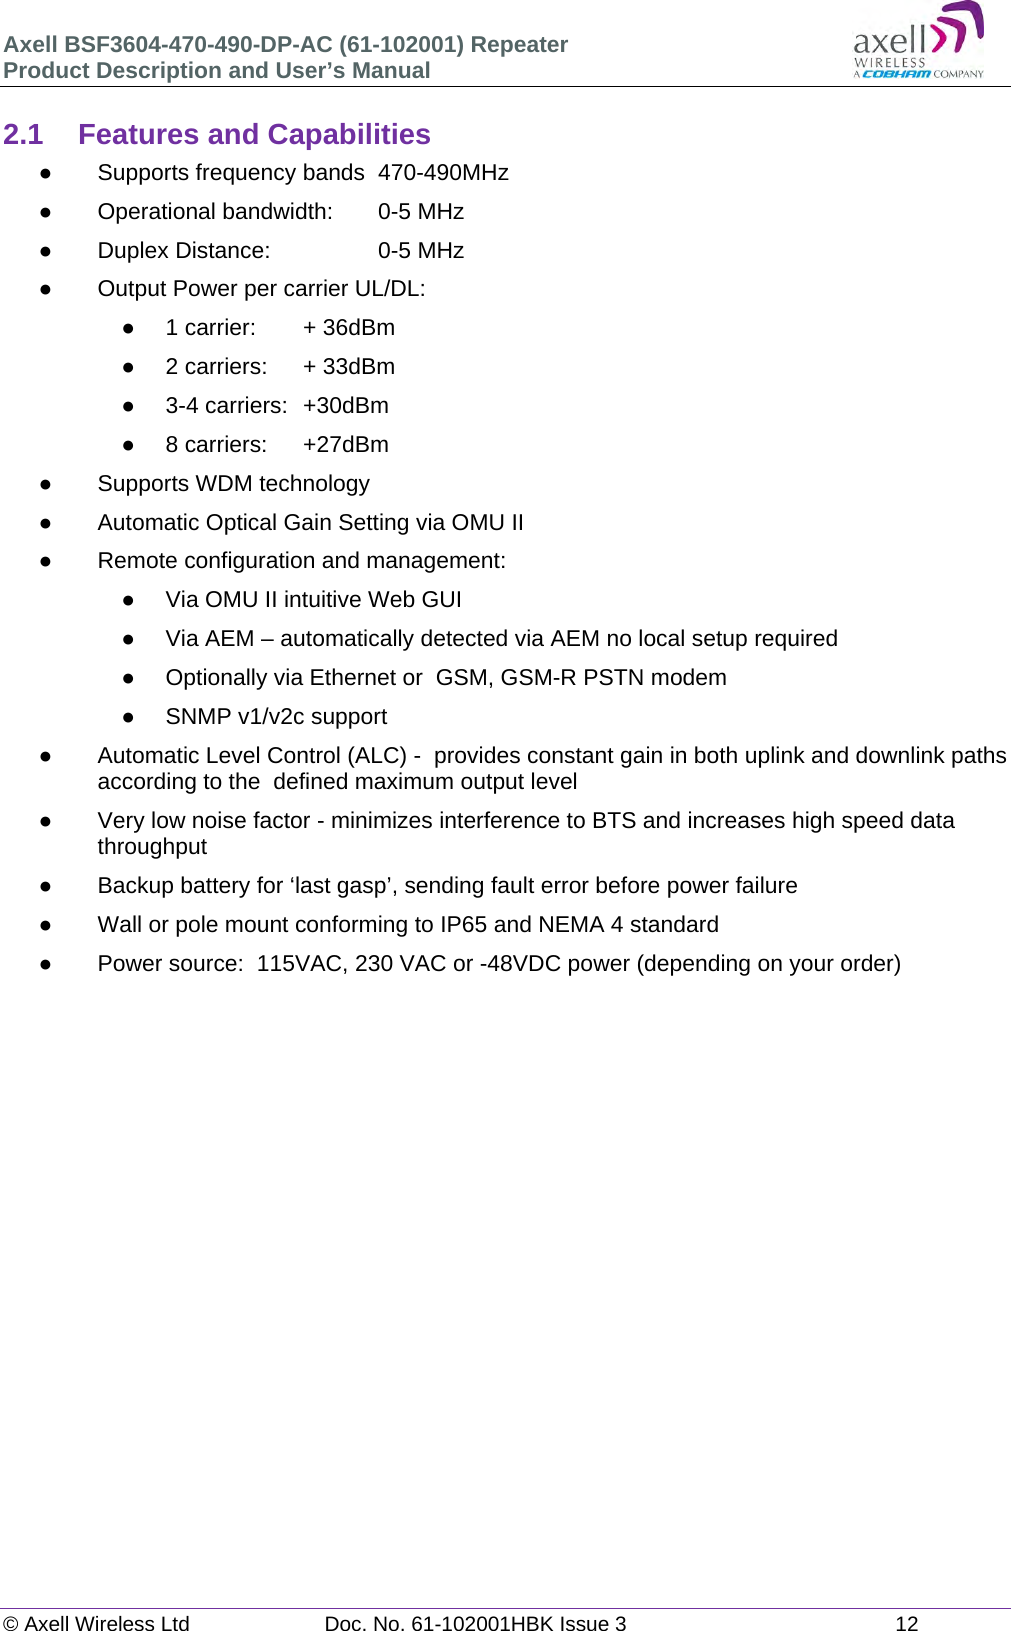 Axell BSF3604-470-490-DP-AC (61-102001) Repeater Product Description and User’s Manual © Axell Wireless Ltd  Doc. No. 61-102001HBK Issue 3  12   2.1  Features and Capabilities   Supports frequency bands  470-490MHz   Operational bandwidth:   0-5 MHz   Duplex Distance:     0-5 MHz   Output Power per carrier UL/DL:    1 carrier:   + 36dBm   2 carriers:   + 33dBm   3-4 carriers:  +30dBm  8 carriers:  +27dBm   Supports WDM technology   Automatic Optical Gain Setting via OMU II   Remote configuration and management:   Via OMU II intuitive Web GUI   Via AEM – automatically detected via AEM no local setup required    Optionally via Ethernet or  GSM, GSM-R PSTN modem   SNMP v1/v2c support   Automatic Level Control (ALC) -  provides constant gain in both uplink and downlink paths according to the  defined maximum output level   Very low noise factor - minimizes interference to BTS and increases high speed data throughput   Backup battery for ‘last gasp’, sending fault error before power failure   Wall or pole mount conforming to IP65 and NEMA 4 standard   Power source:  115VAC, 230 VAC or -48VDC power (depending on your order)      